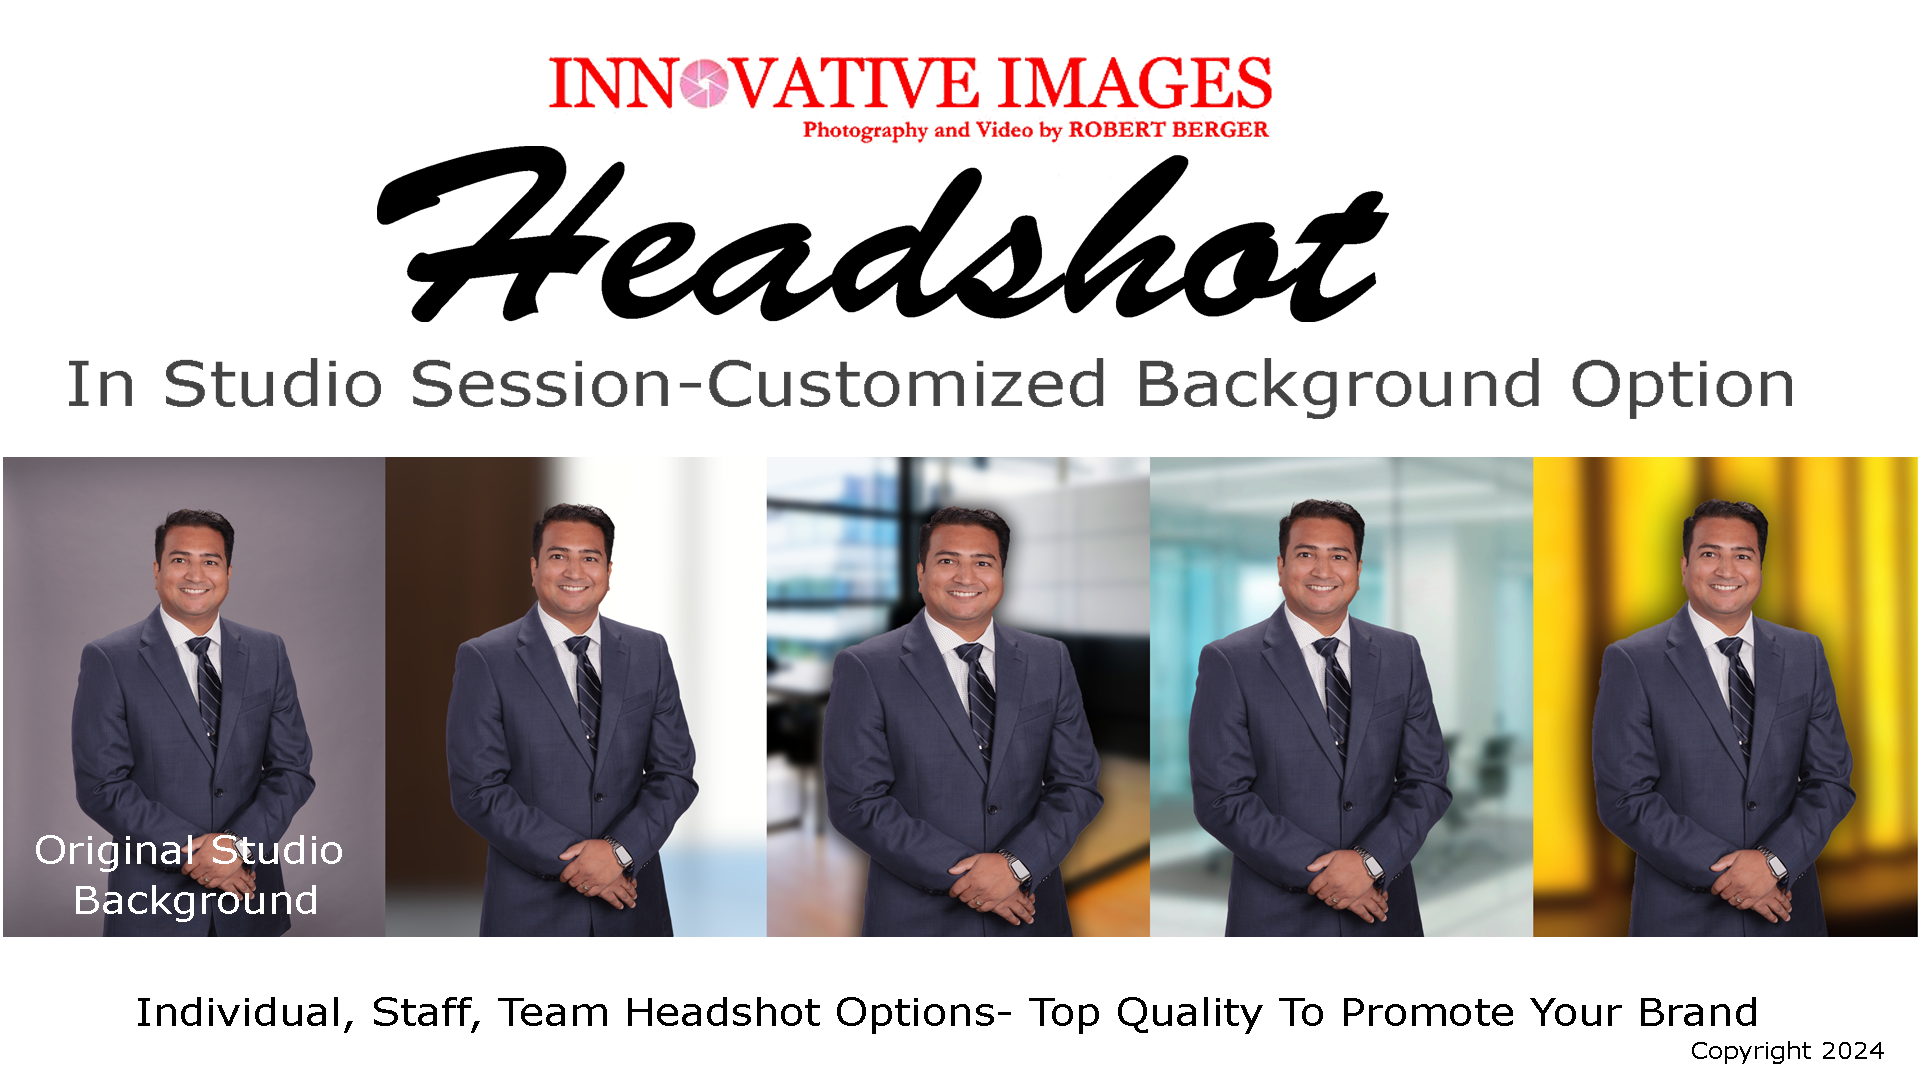 An in-studio headshot banner in houston texas for headshot photography. The banner shows an individual with a classic gray background and then shows four office and location background options that can be interchanged with his original background. Corporate branding needs a consistent look for teams and staff. Call us today. Professional headshot and business portrait at Innovative Images Photography by Robert Berger. 11211 Richmond Ave Suite B101 Houston TX 77082 Servicing these areas Photography Service areas include 77005, 77401, 77019, 77024, 77055, 77025. 77027, 77057, 77081, 77081, 77082, 77098, 77030, 77063, 77056, , 77082, 77077 77096, 77407, 77079, 77346, 77459, 77494, 77450, 77498, 77407, 77441, 77433, 77493, 77489, 77478, 77469, 77406, 77497, 77464, 77477